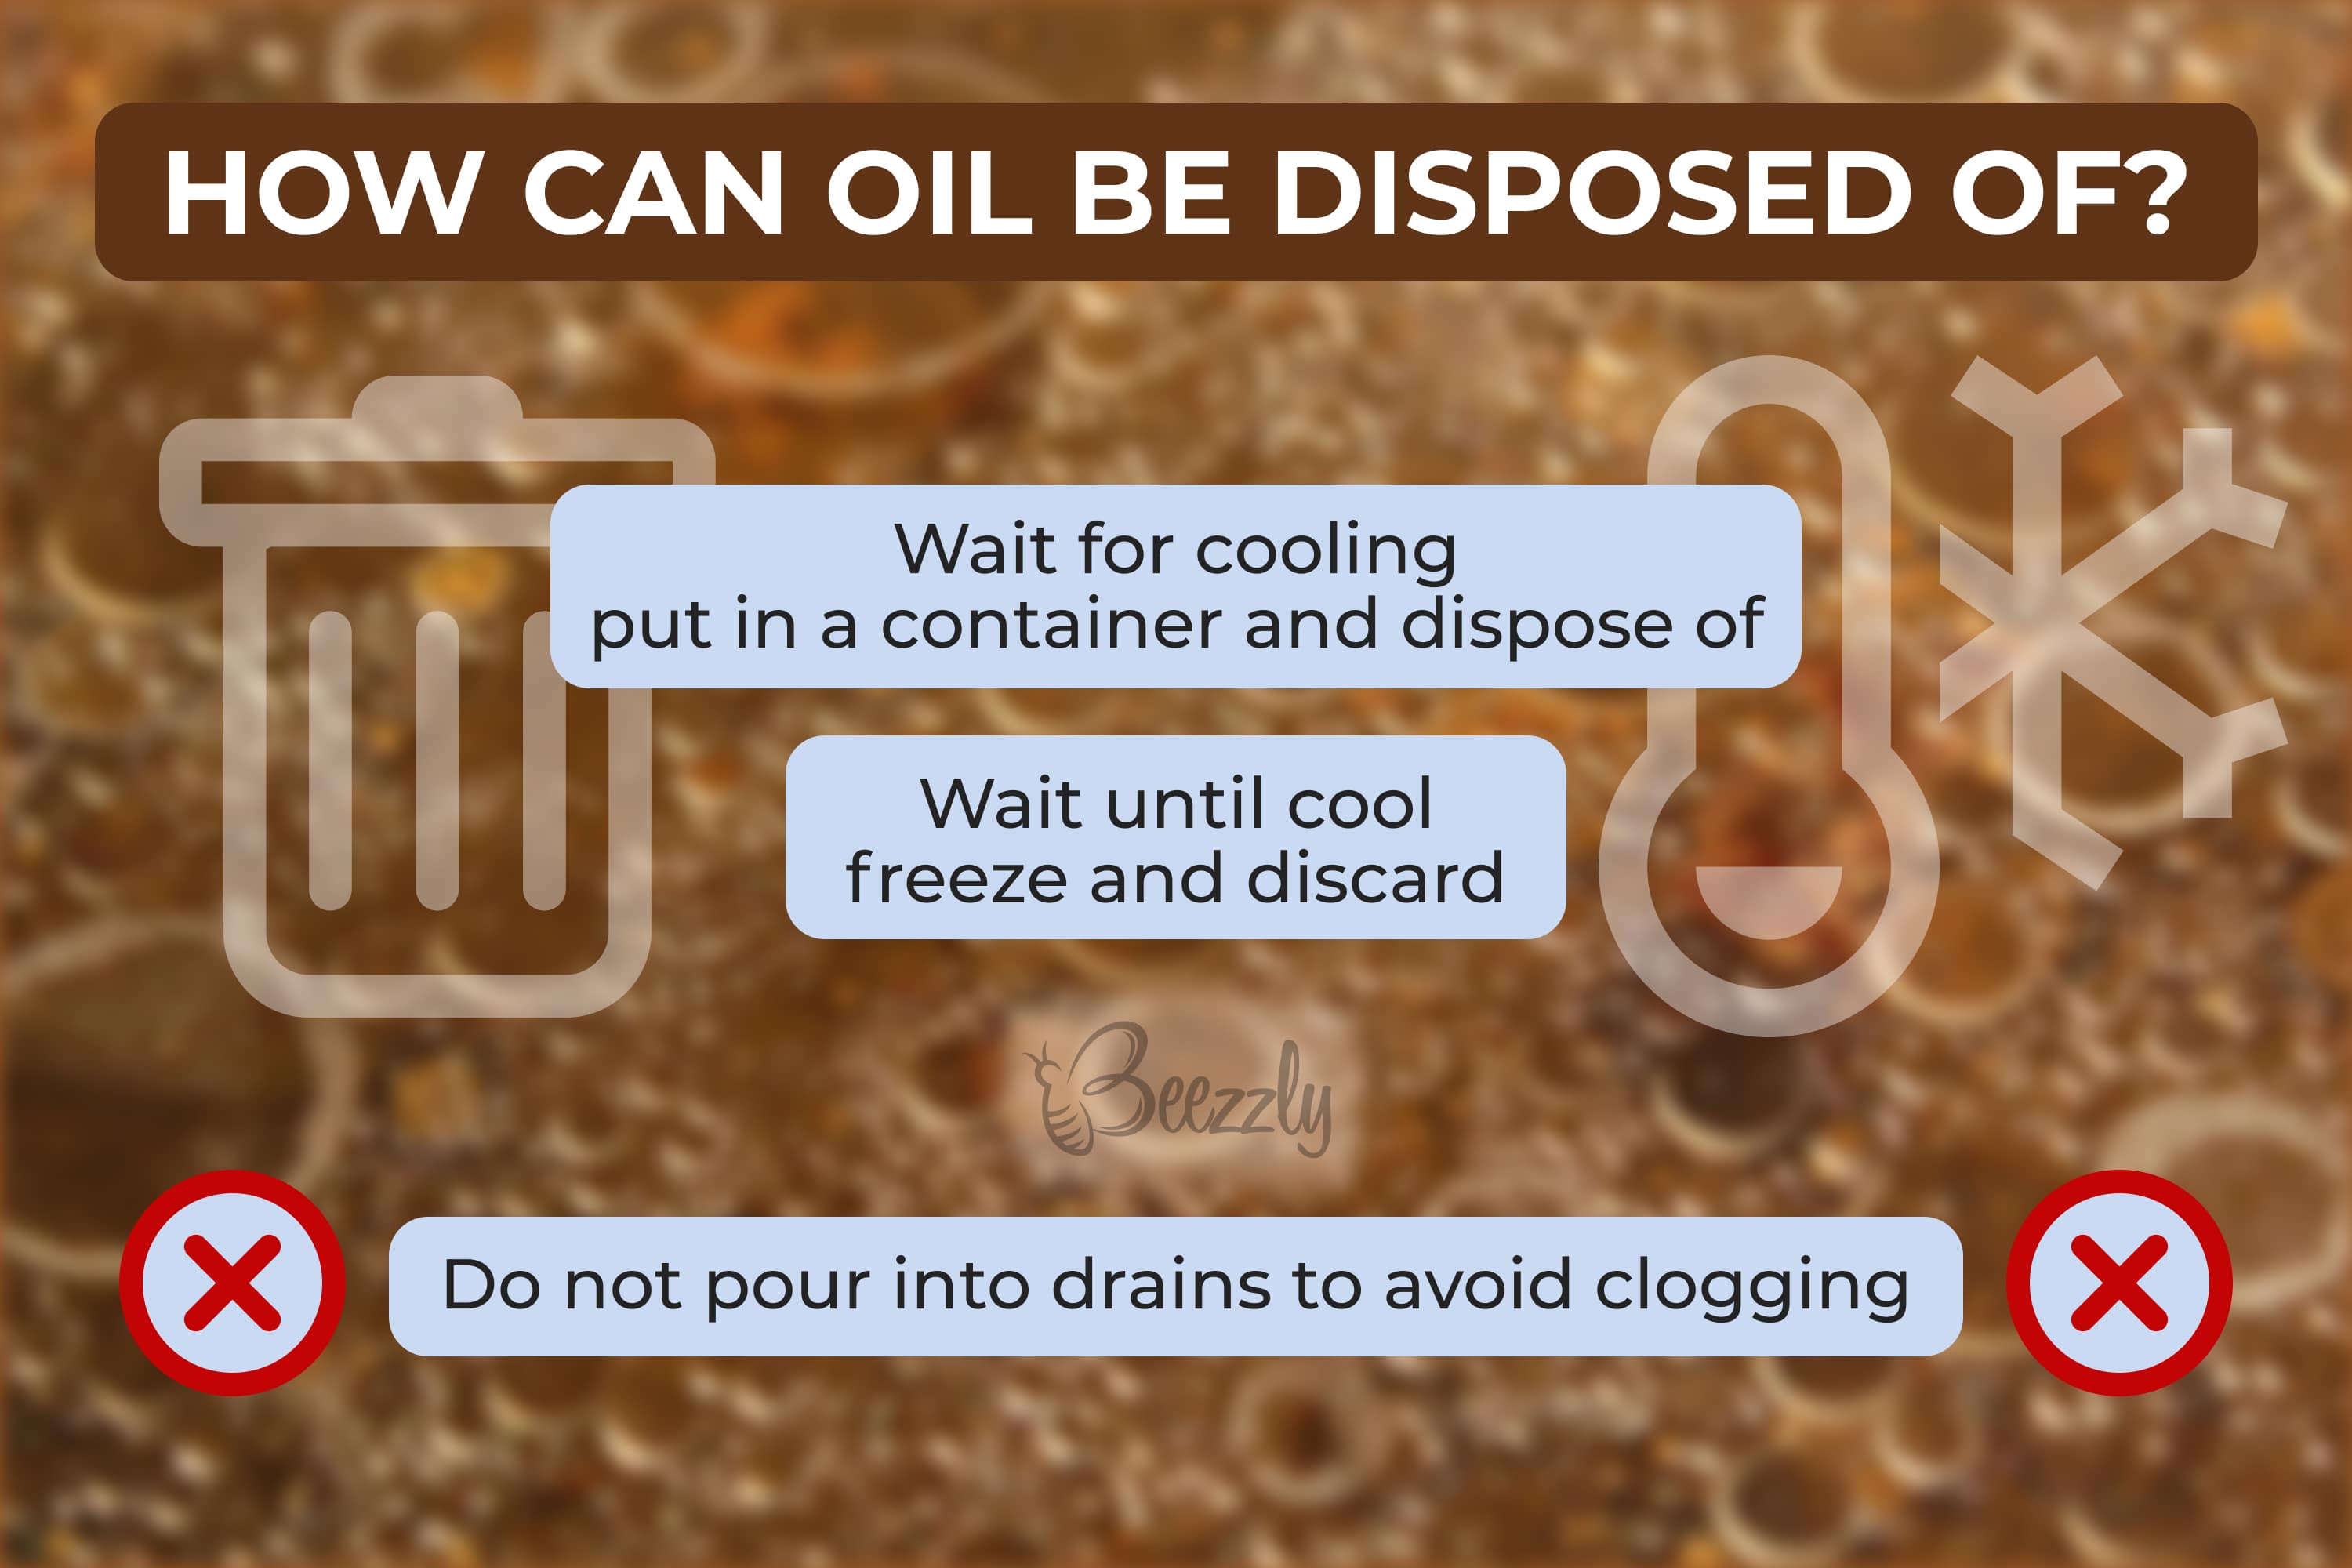 How can oil be disposed of